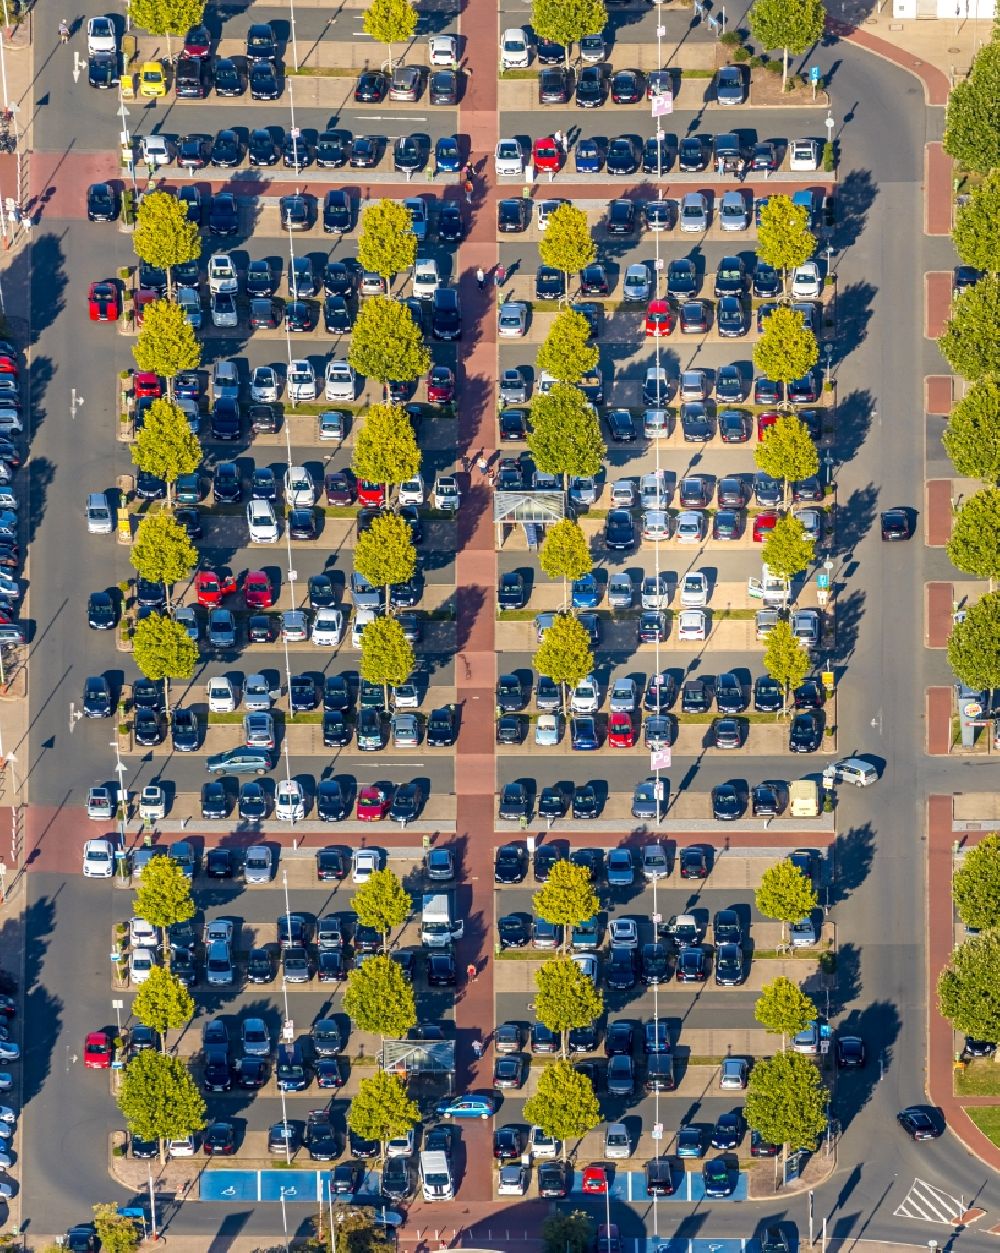 Bad Oeynhausen from above - Parking and storage space for automobiles at the shopping mall Werre-Park on Mindener Strasse in Bad Oeynhausen in the state North Rhine-Westphalia, Germany